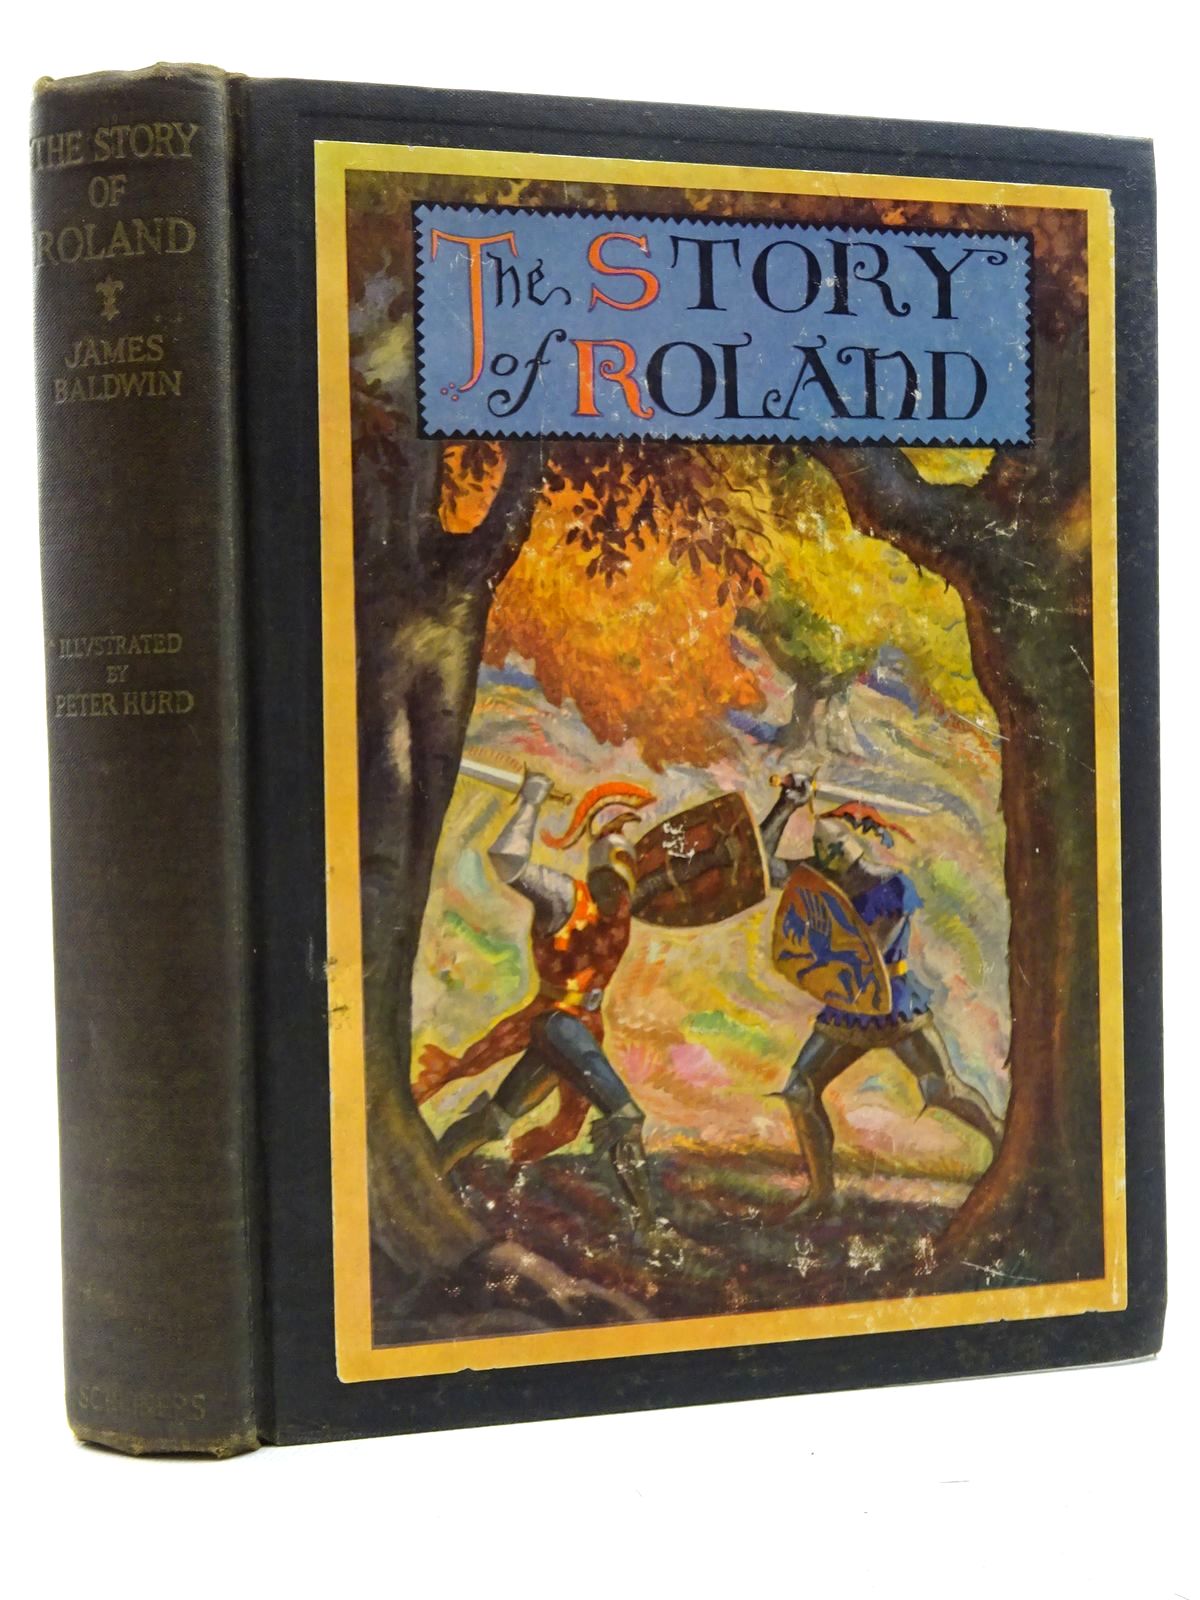 Photo of THE STORY OF ROLAND written by Baldwin, James illustrated by Hurd, Peter published by Charles Scribner's Sons (STOCK CODE: 2125094)  for sale by Stella & Rose's Books